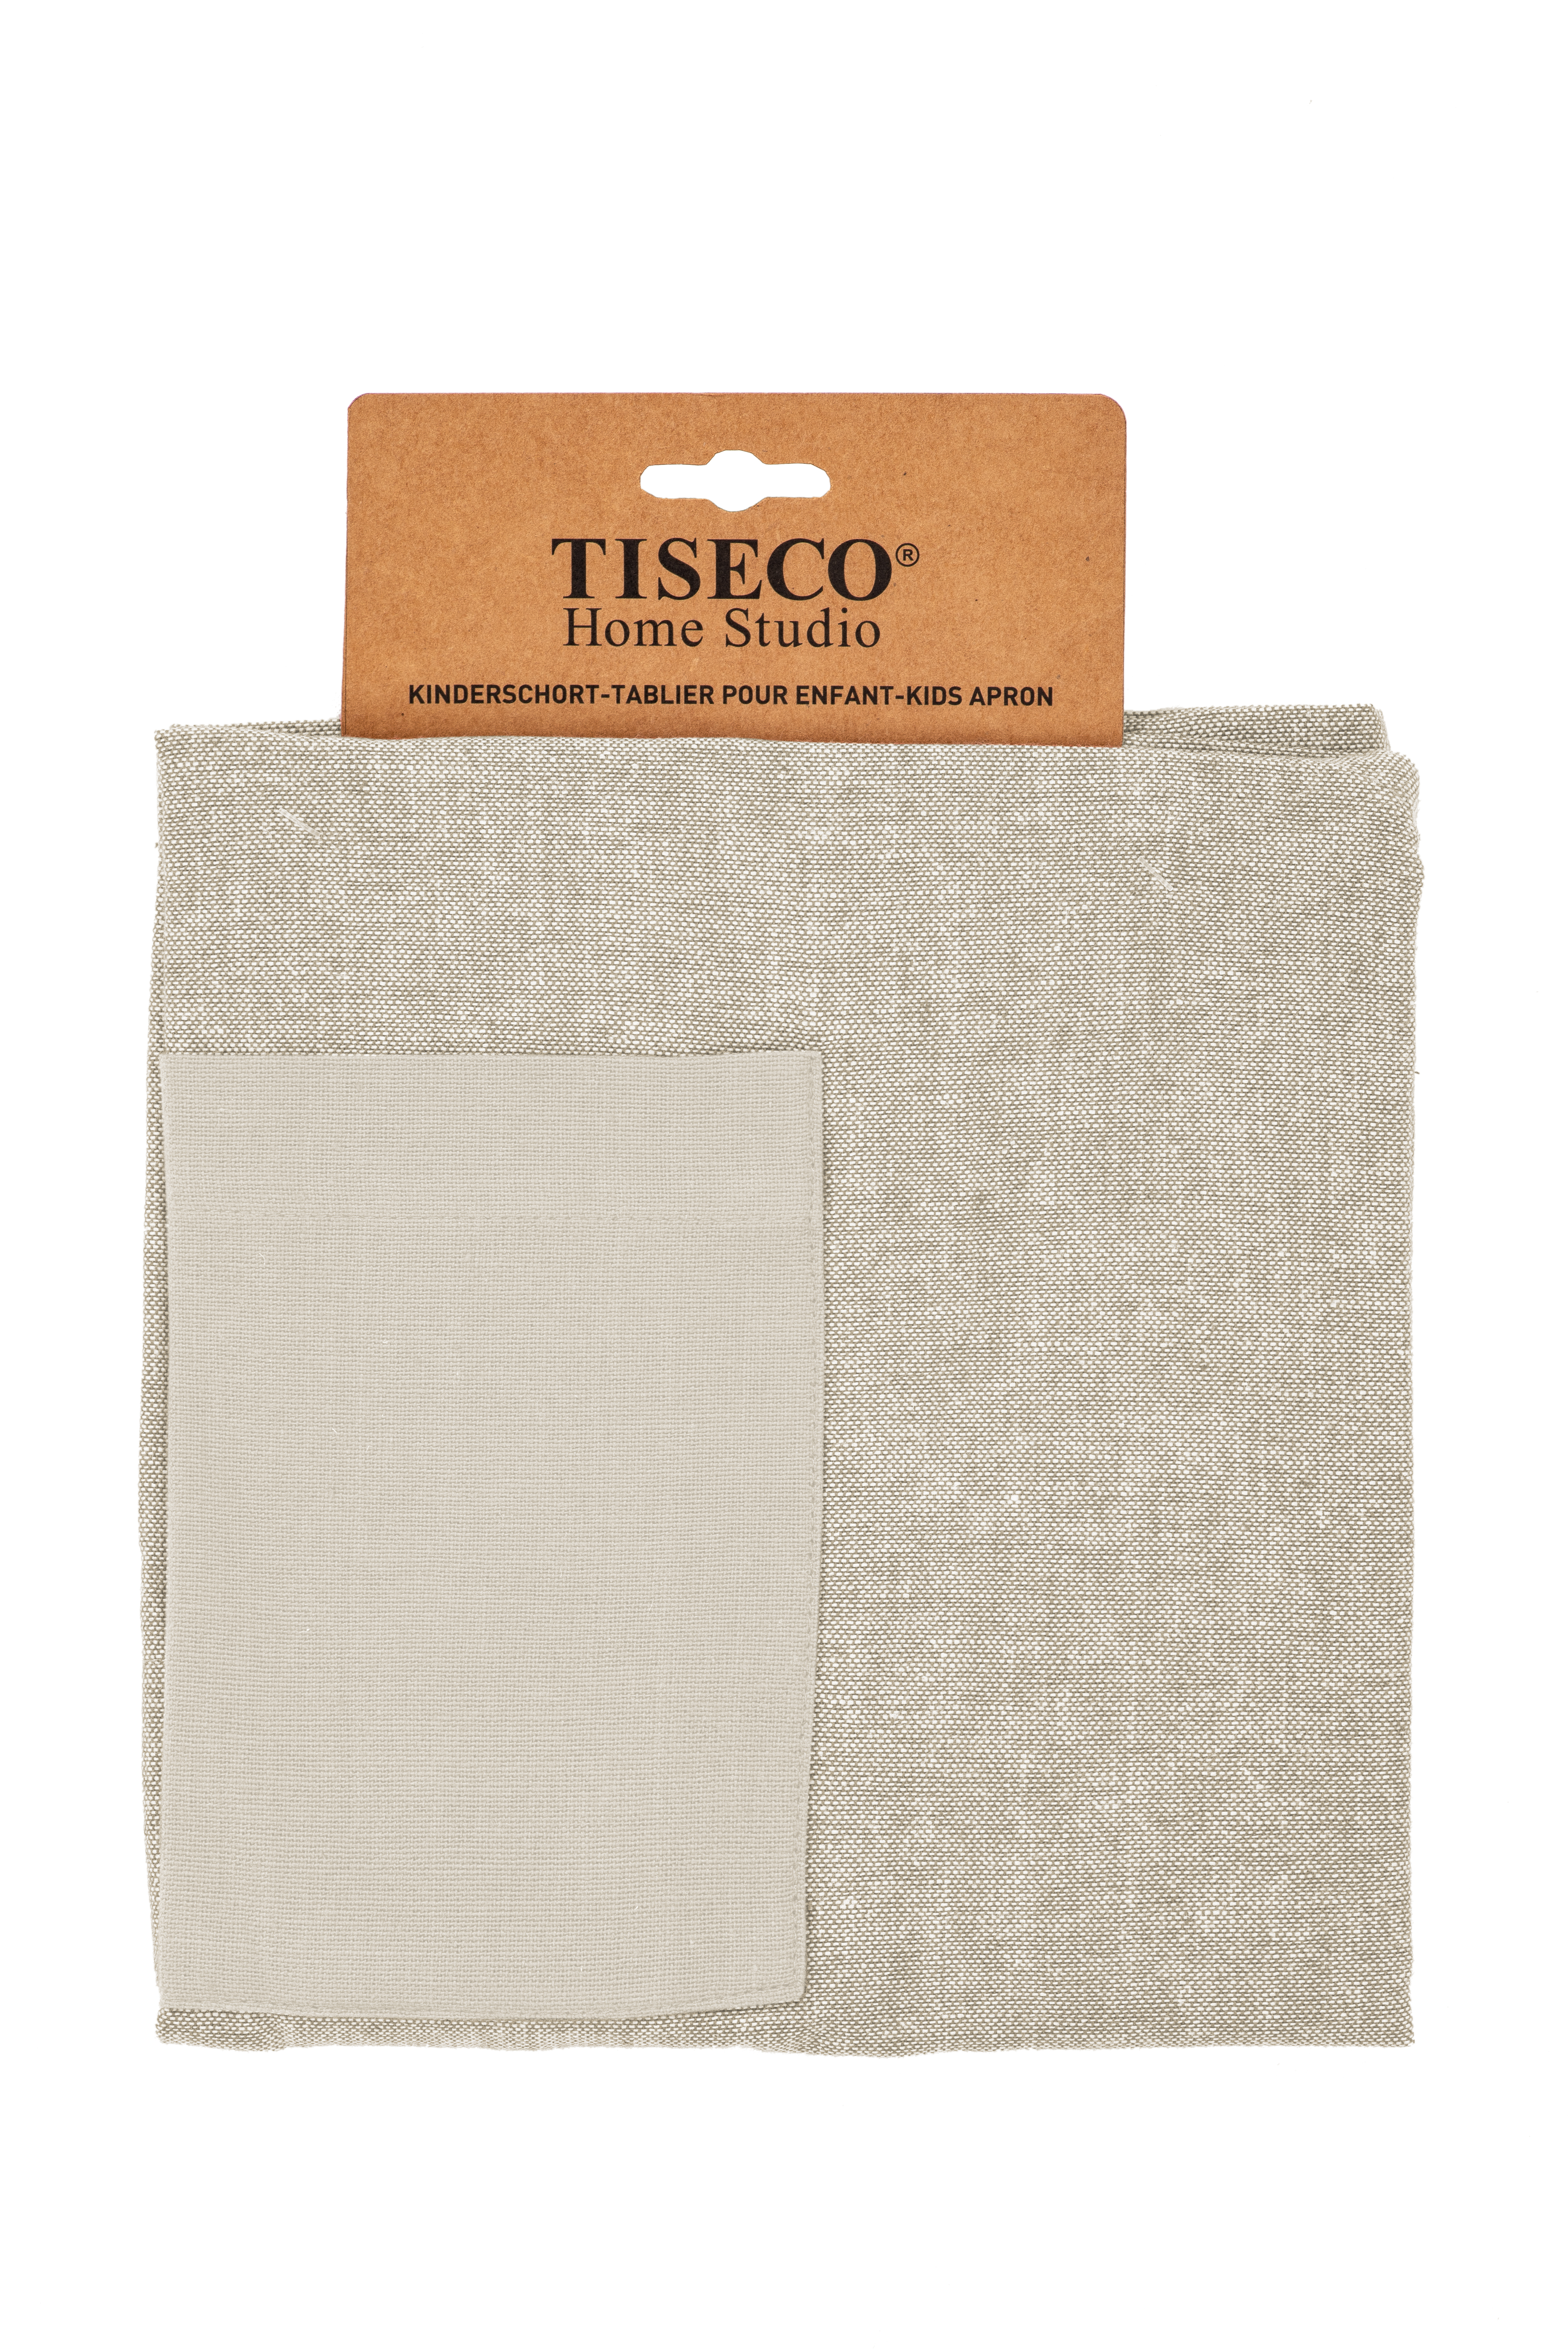 Kinderschort  CHAMBRAY 52x63cm, taupe